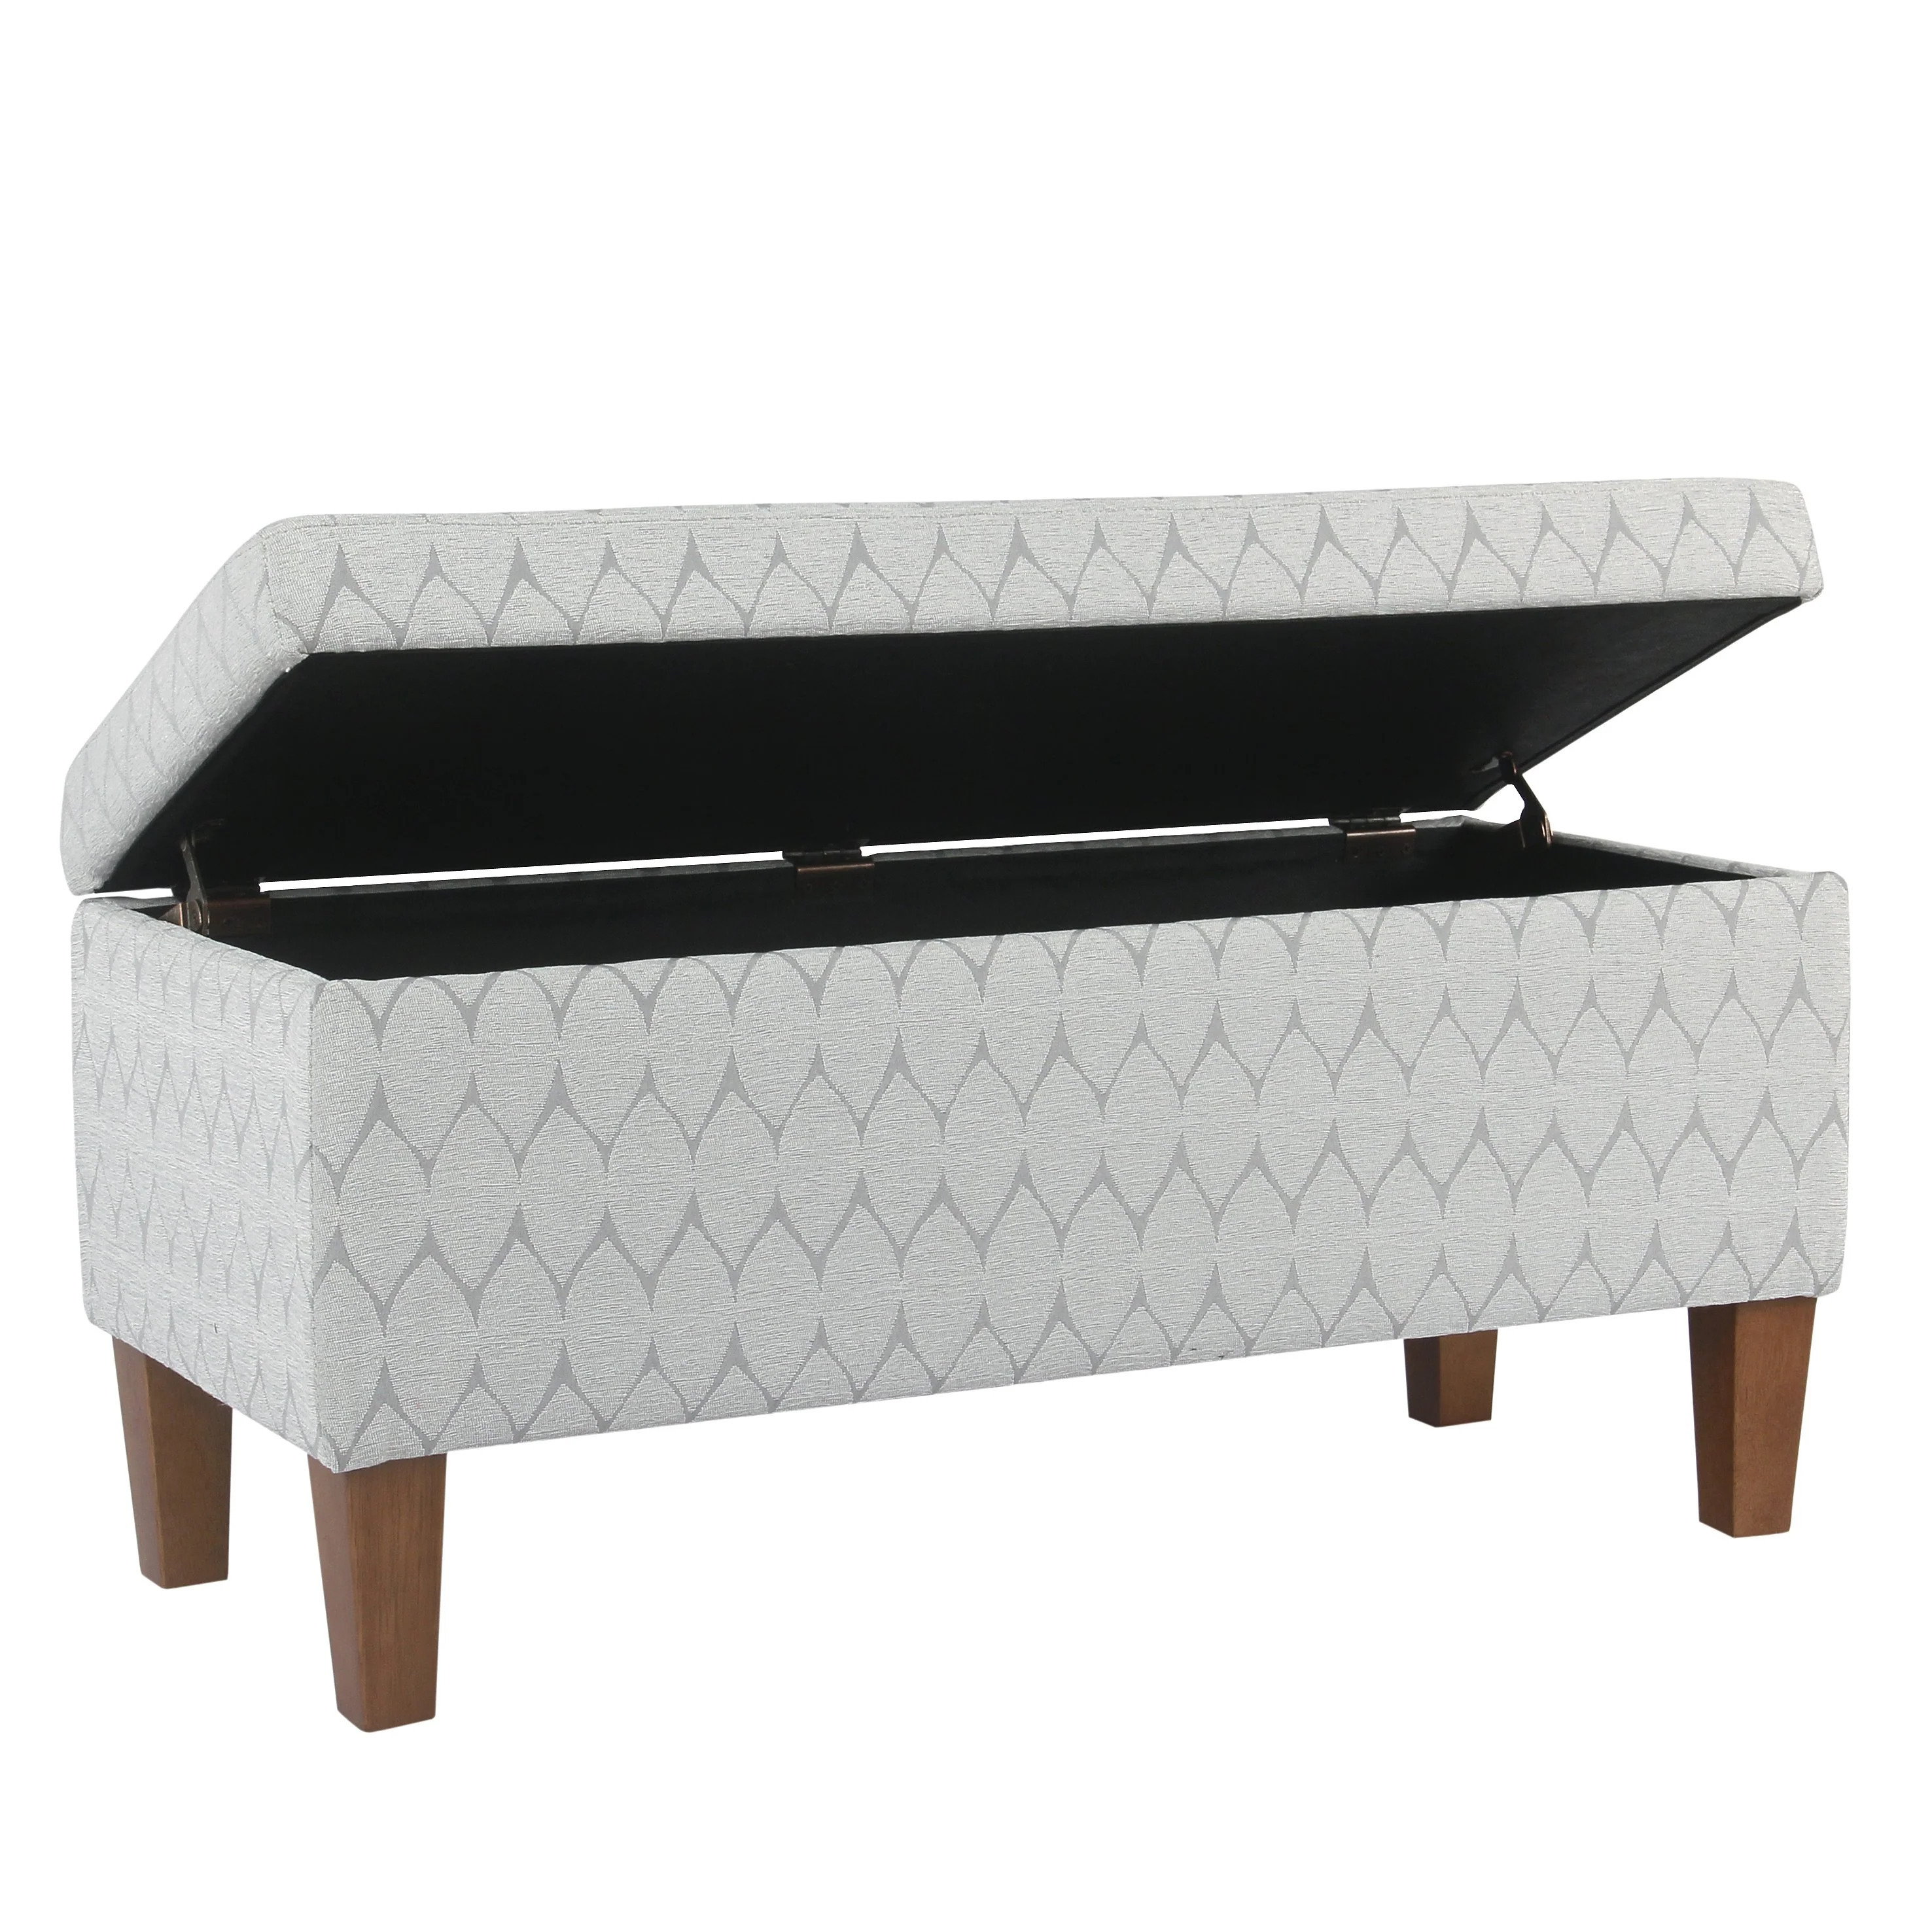 Geometric Patterned Fabric Upholstered Wooden Bench With Hinged Storage, Large, Gray And Brown- Saltoro Sherpi